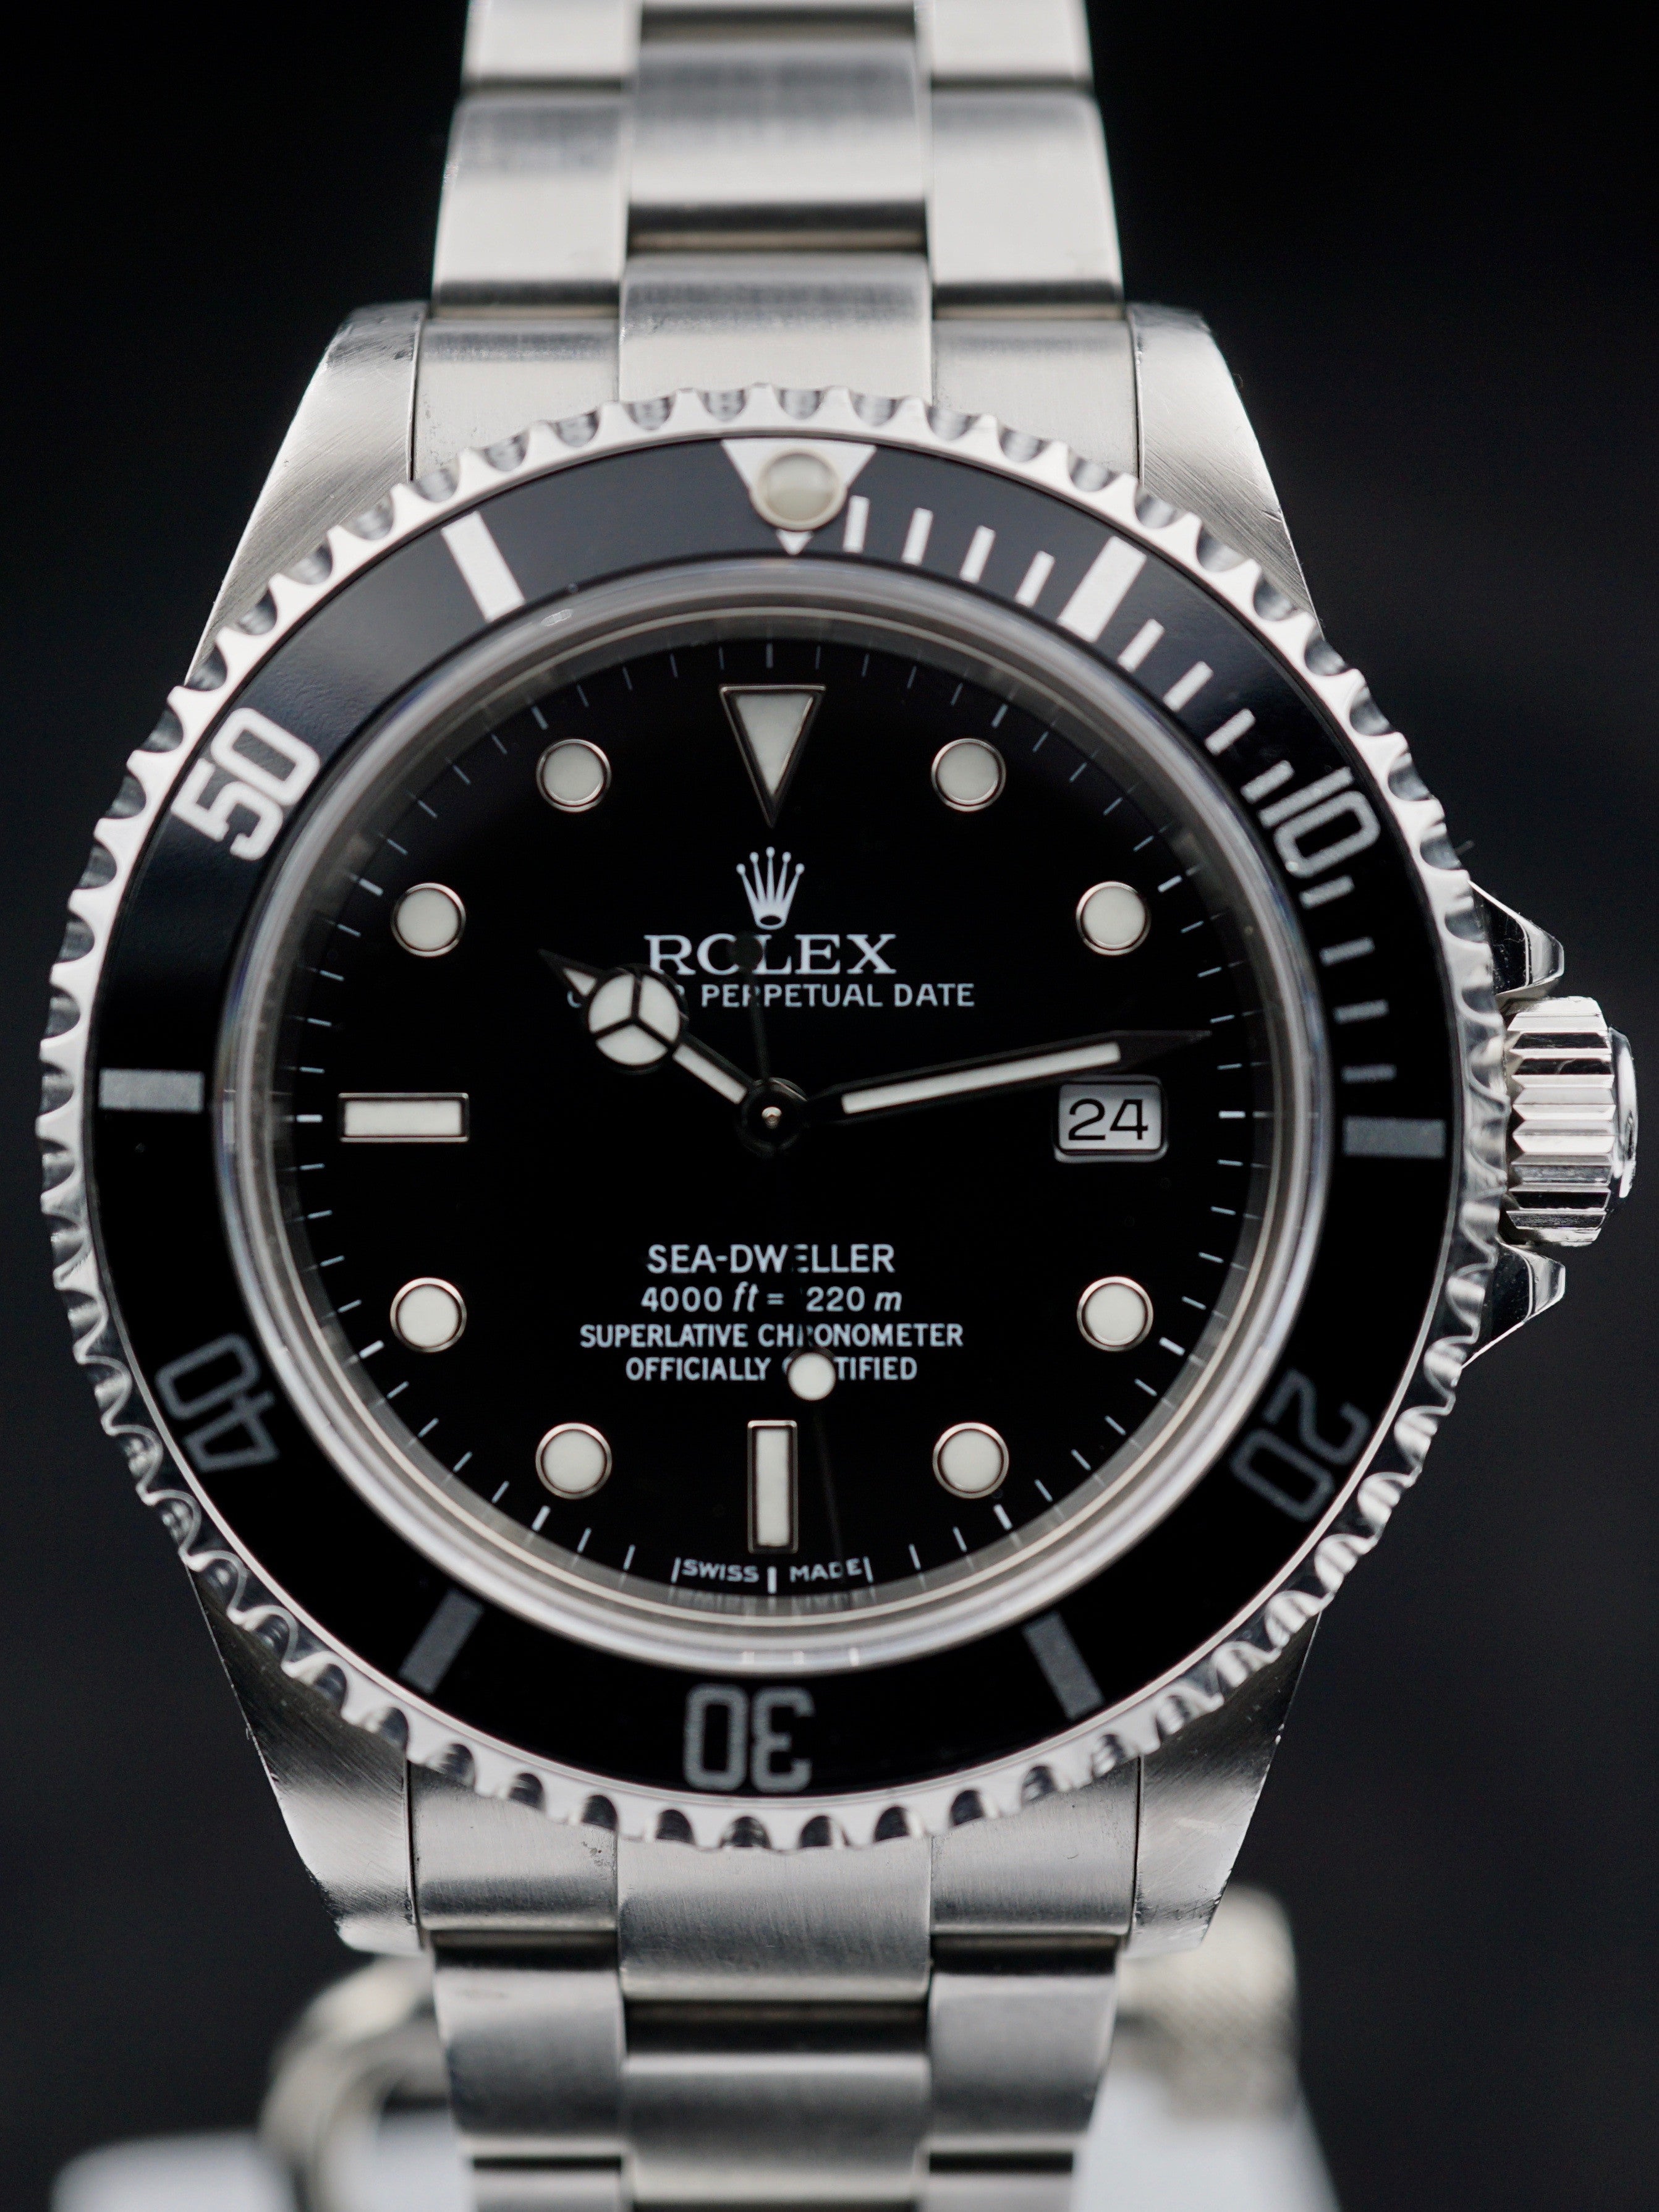 2002 Rolex Sea Dweller Ref. 16600 with Box and Papers